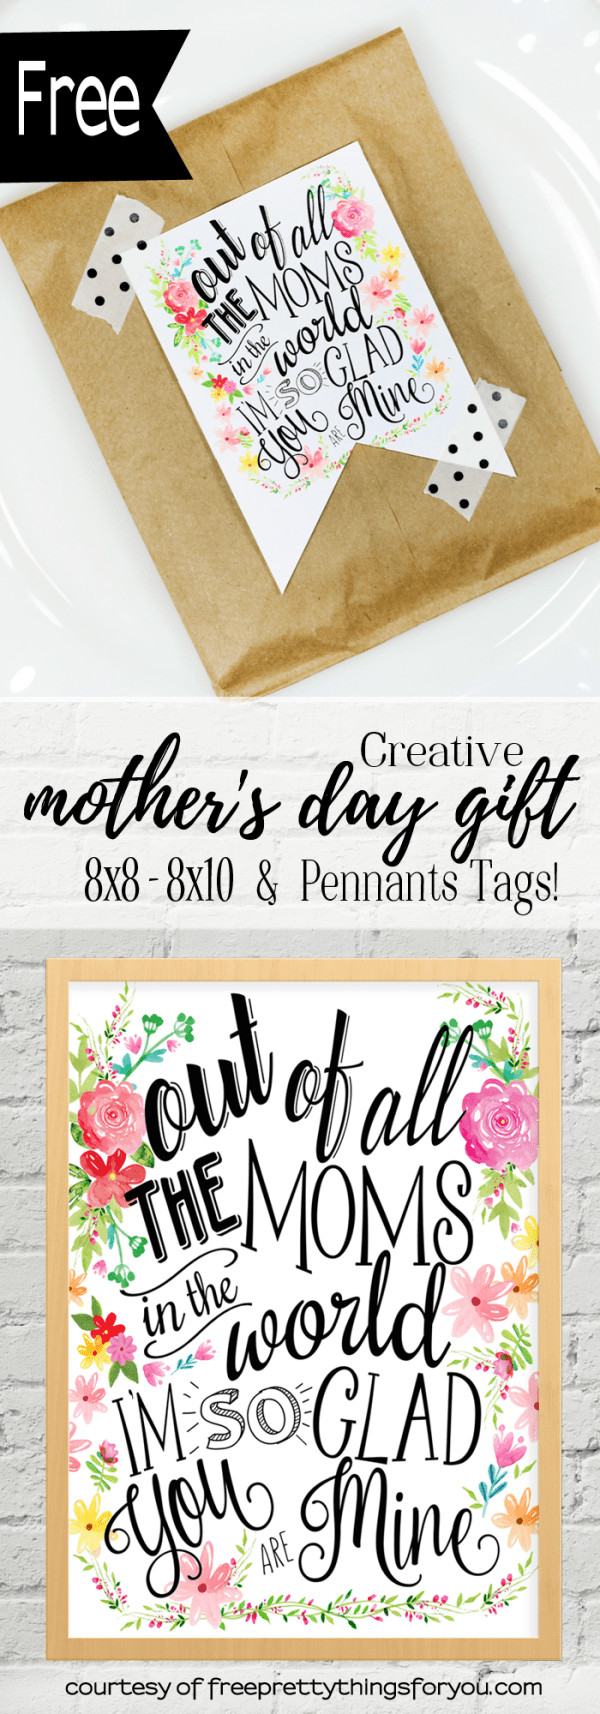 Free Mothers Day Ideas
 20 Beautiful Free Mother s Day Printables JoDitt Designs